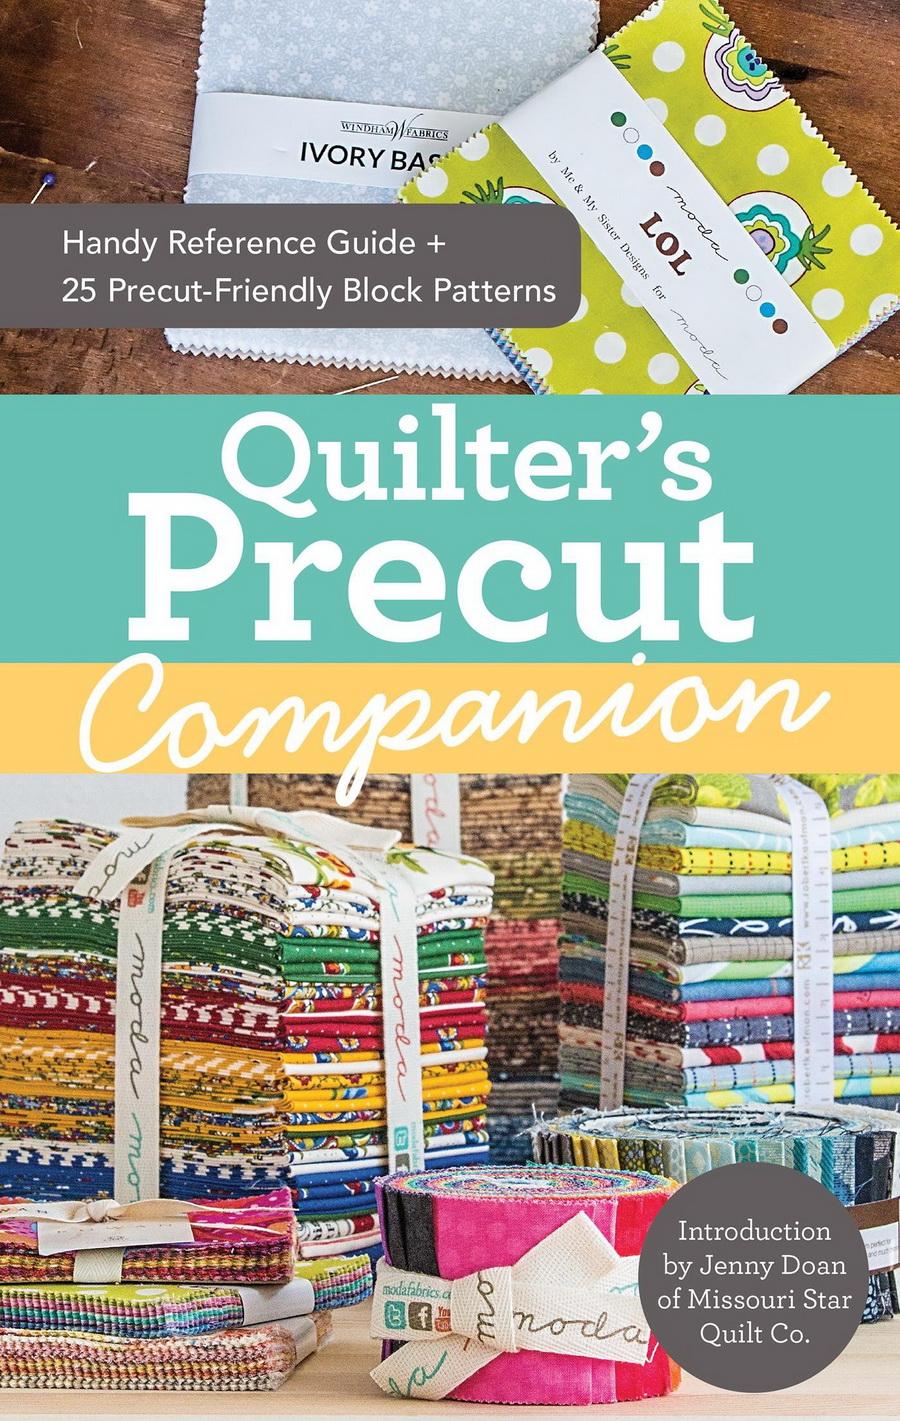 Quilters Precut Companion: Handy Reference Guide + 25 Precut-Friendly Block Patterns